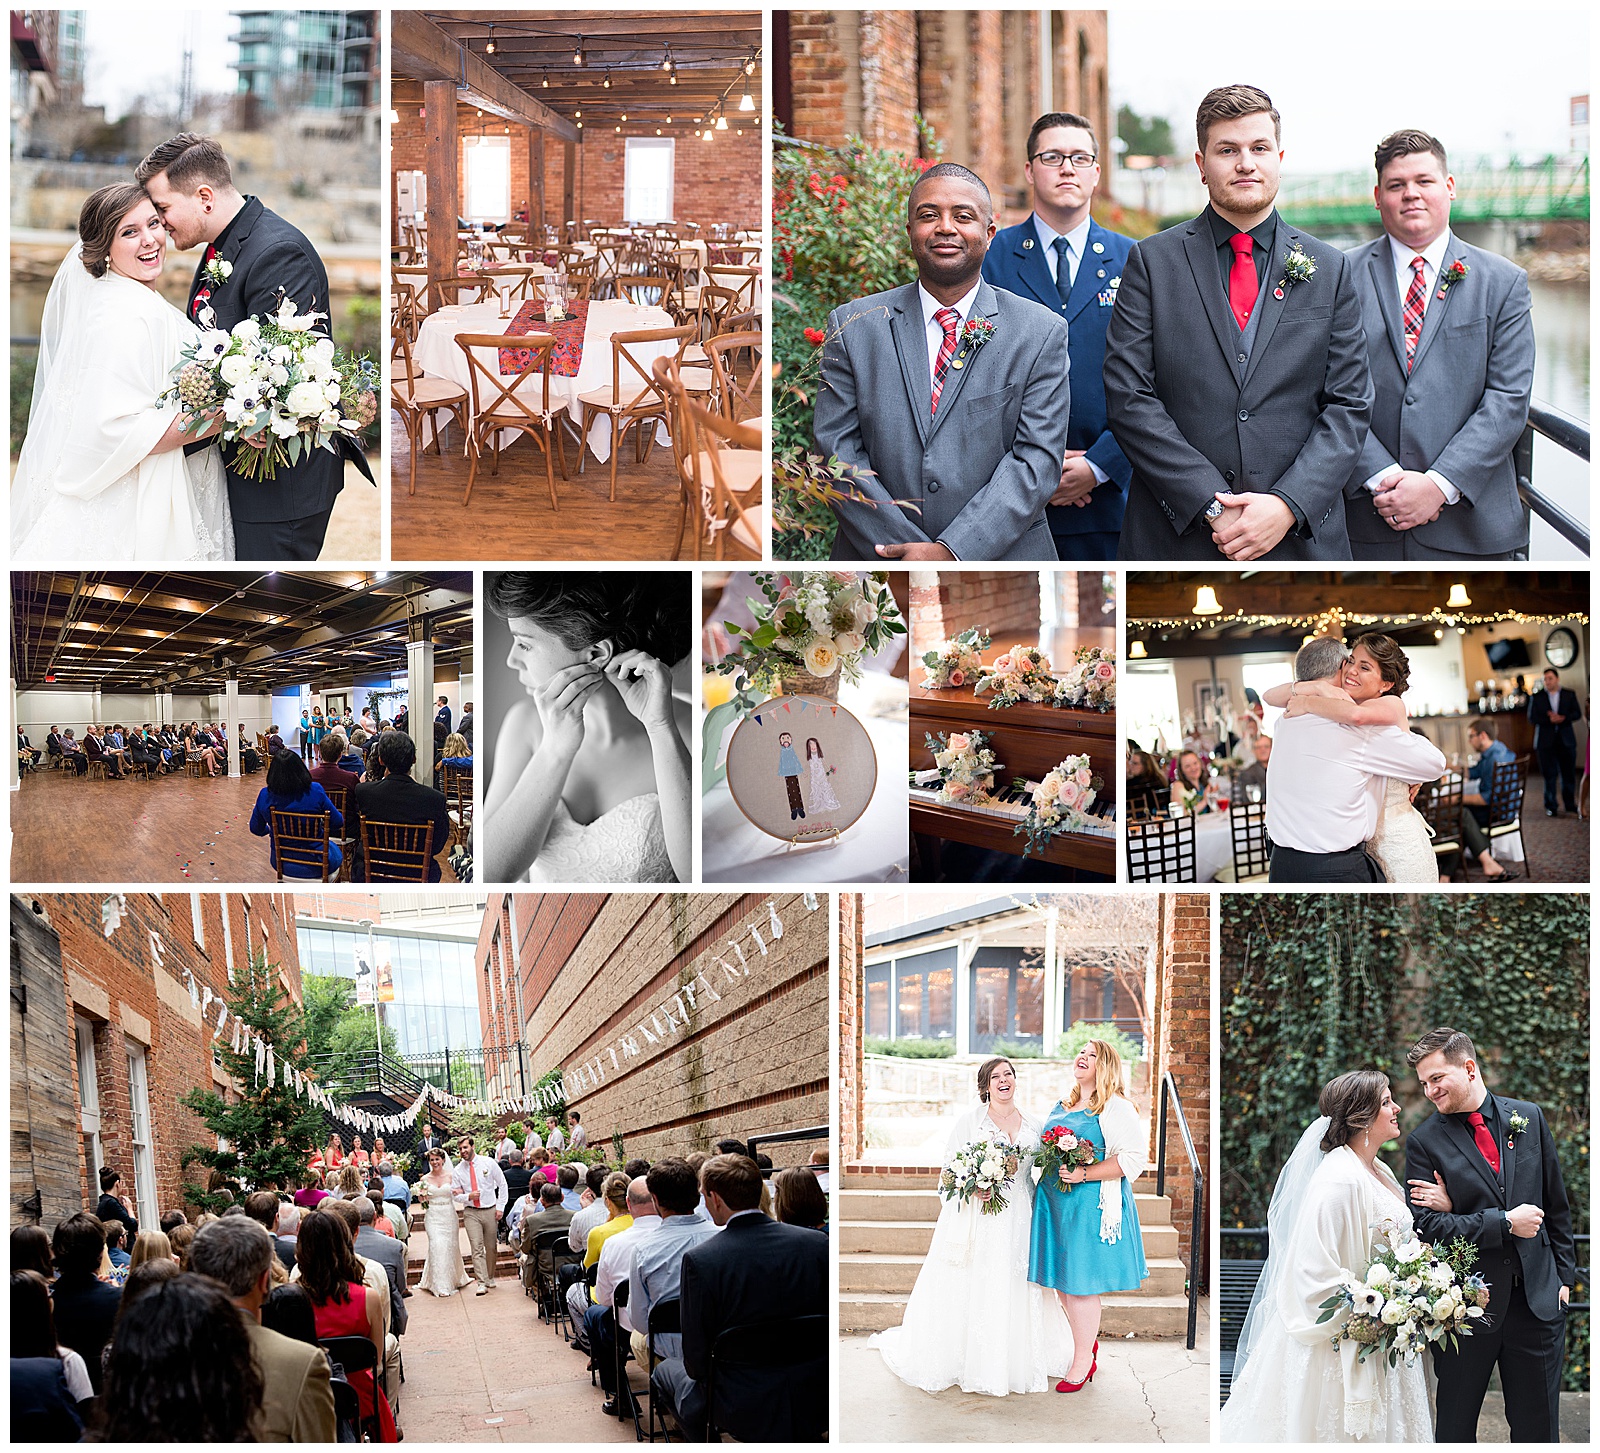 wedding & reeption images at larkins on the river. There is exposed brick inside and downtown views outside